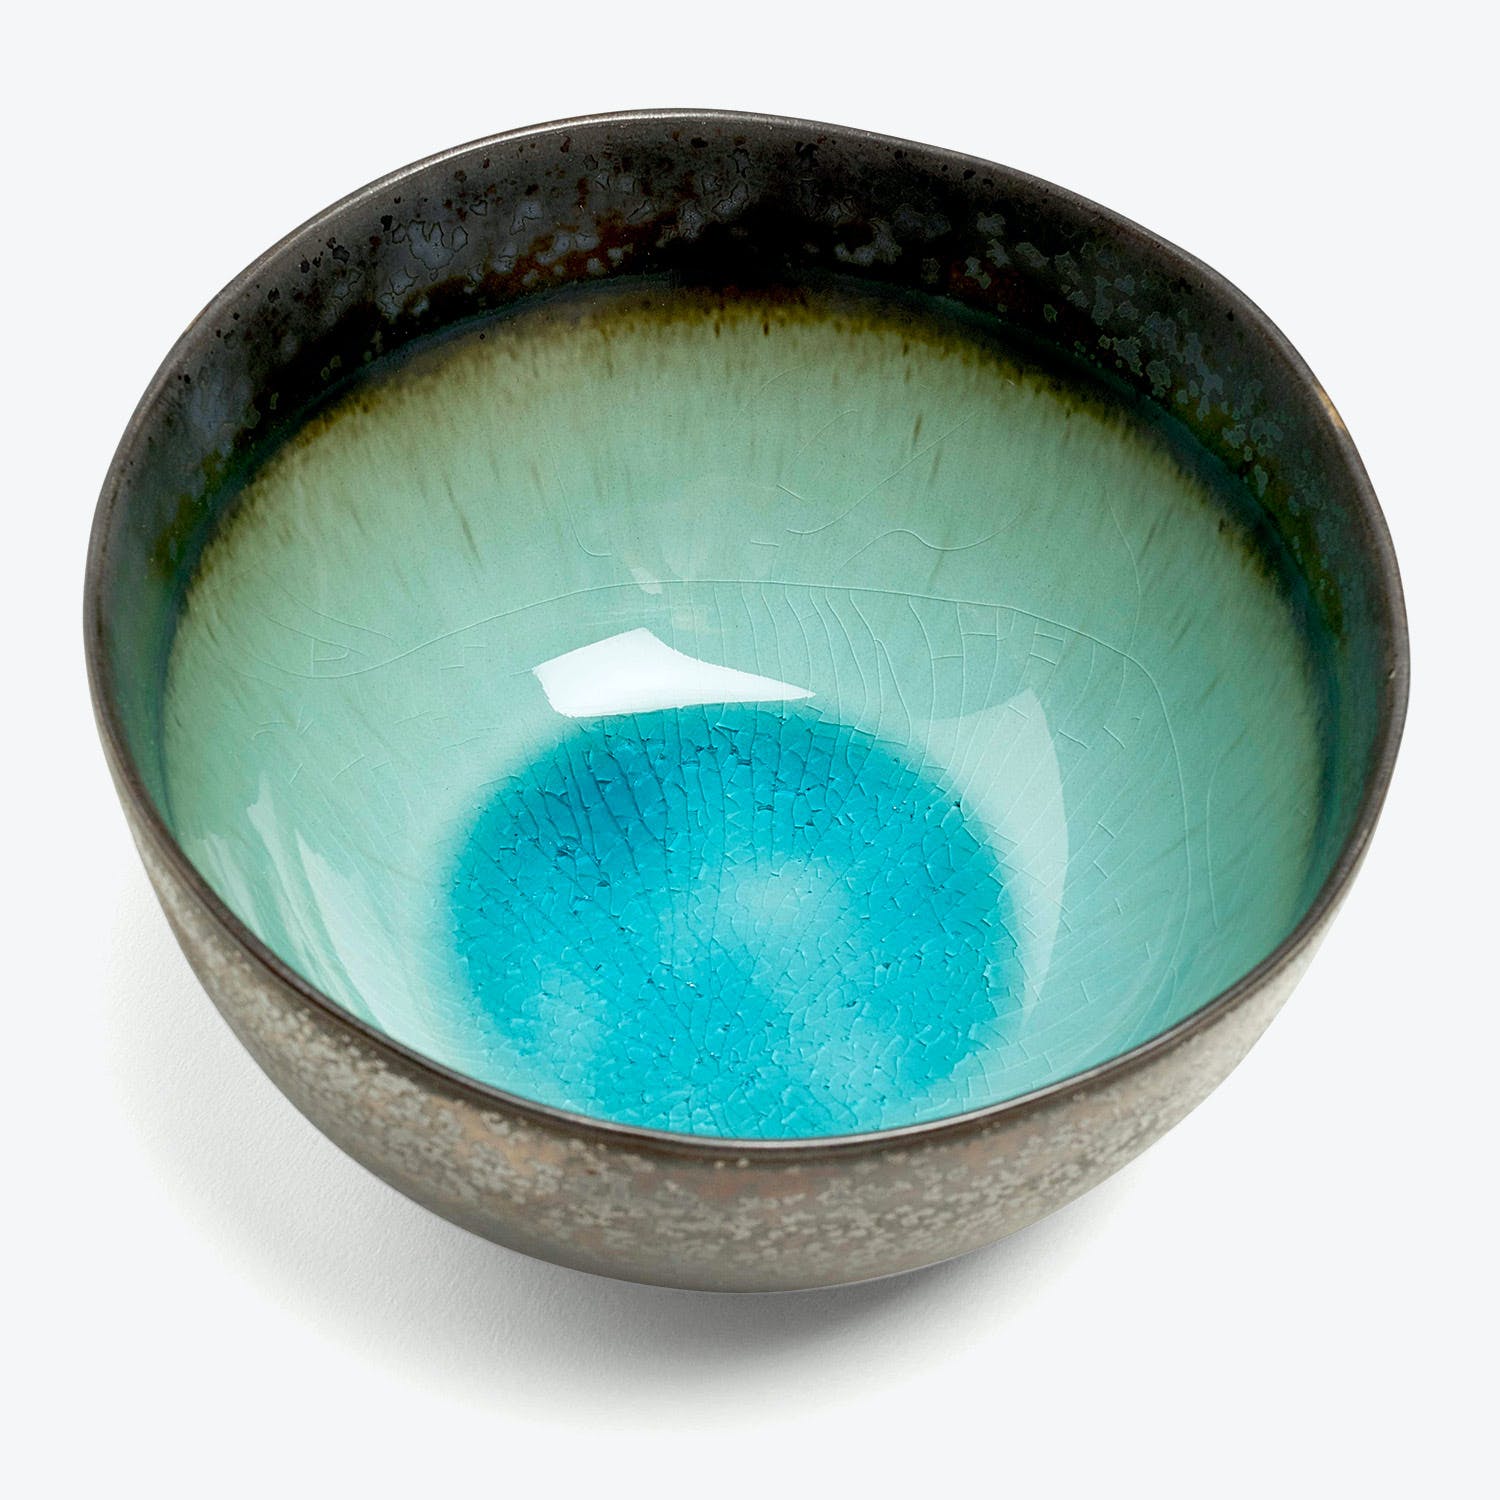 Ceramic bowl with textured glaze transitions from dark to vibrant